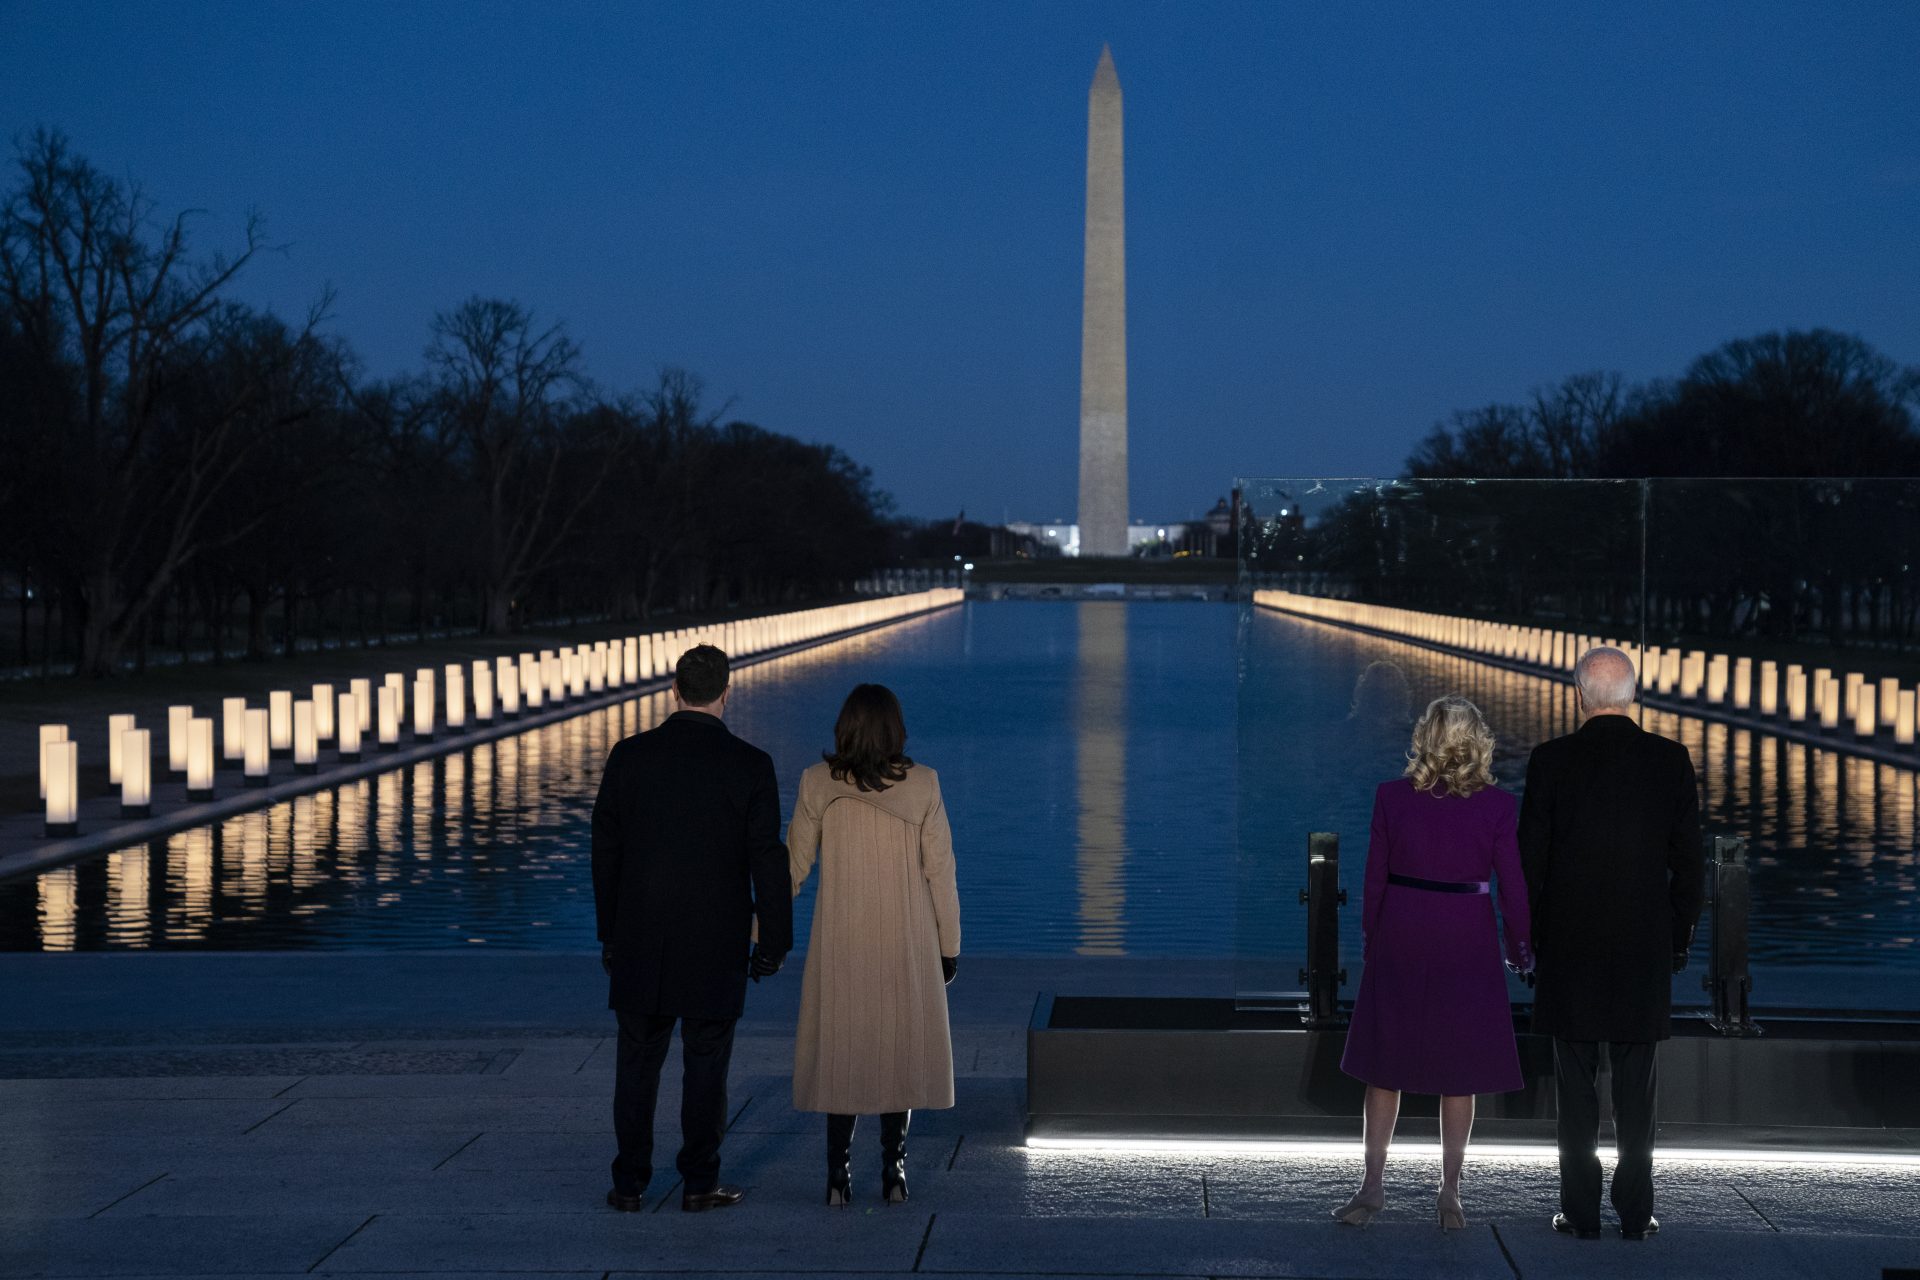 President-elect Joe Biden and his wife Jill Biden are joined by Vice President-elect Kamala Harris and her husband Doug Emhoff to participate in a COVID-19 memorial event at the Lincoln Memorial Reflecting Pool, Tuesday, Jan. 19, 2021, in Washington.